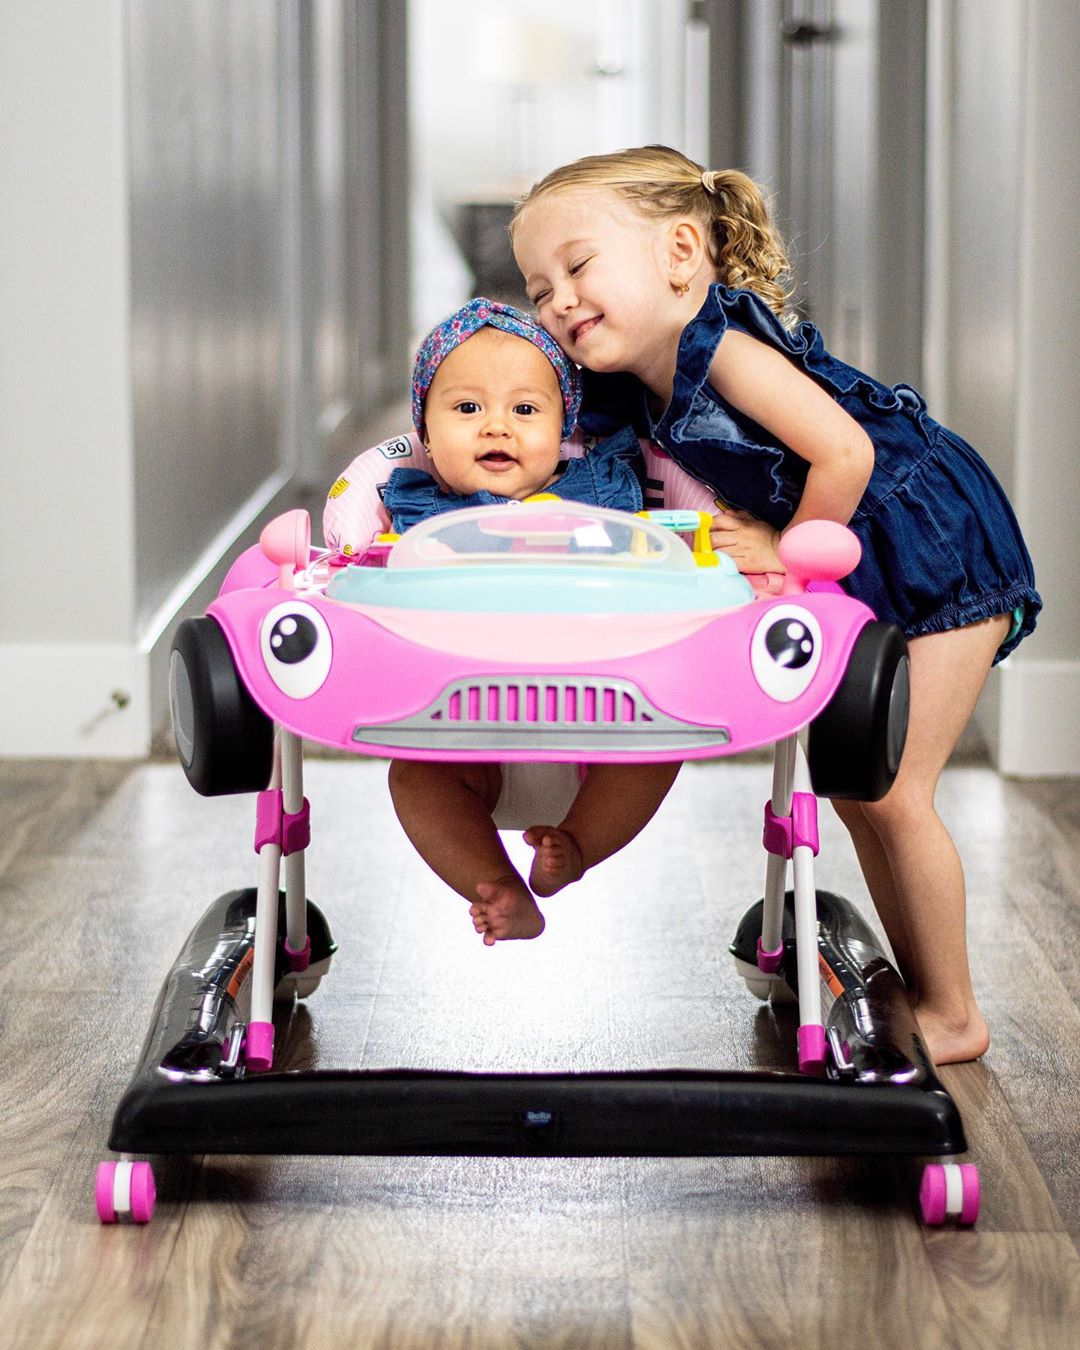 Baby in baby walker next to big sister. Photo by Instagram user @vivimccoy_